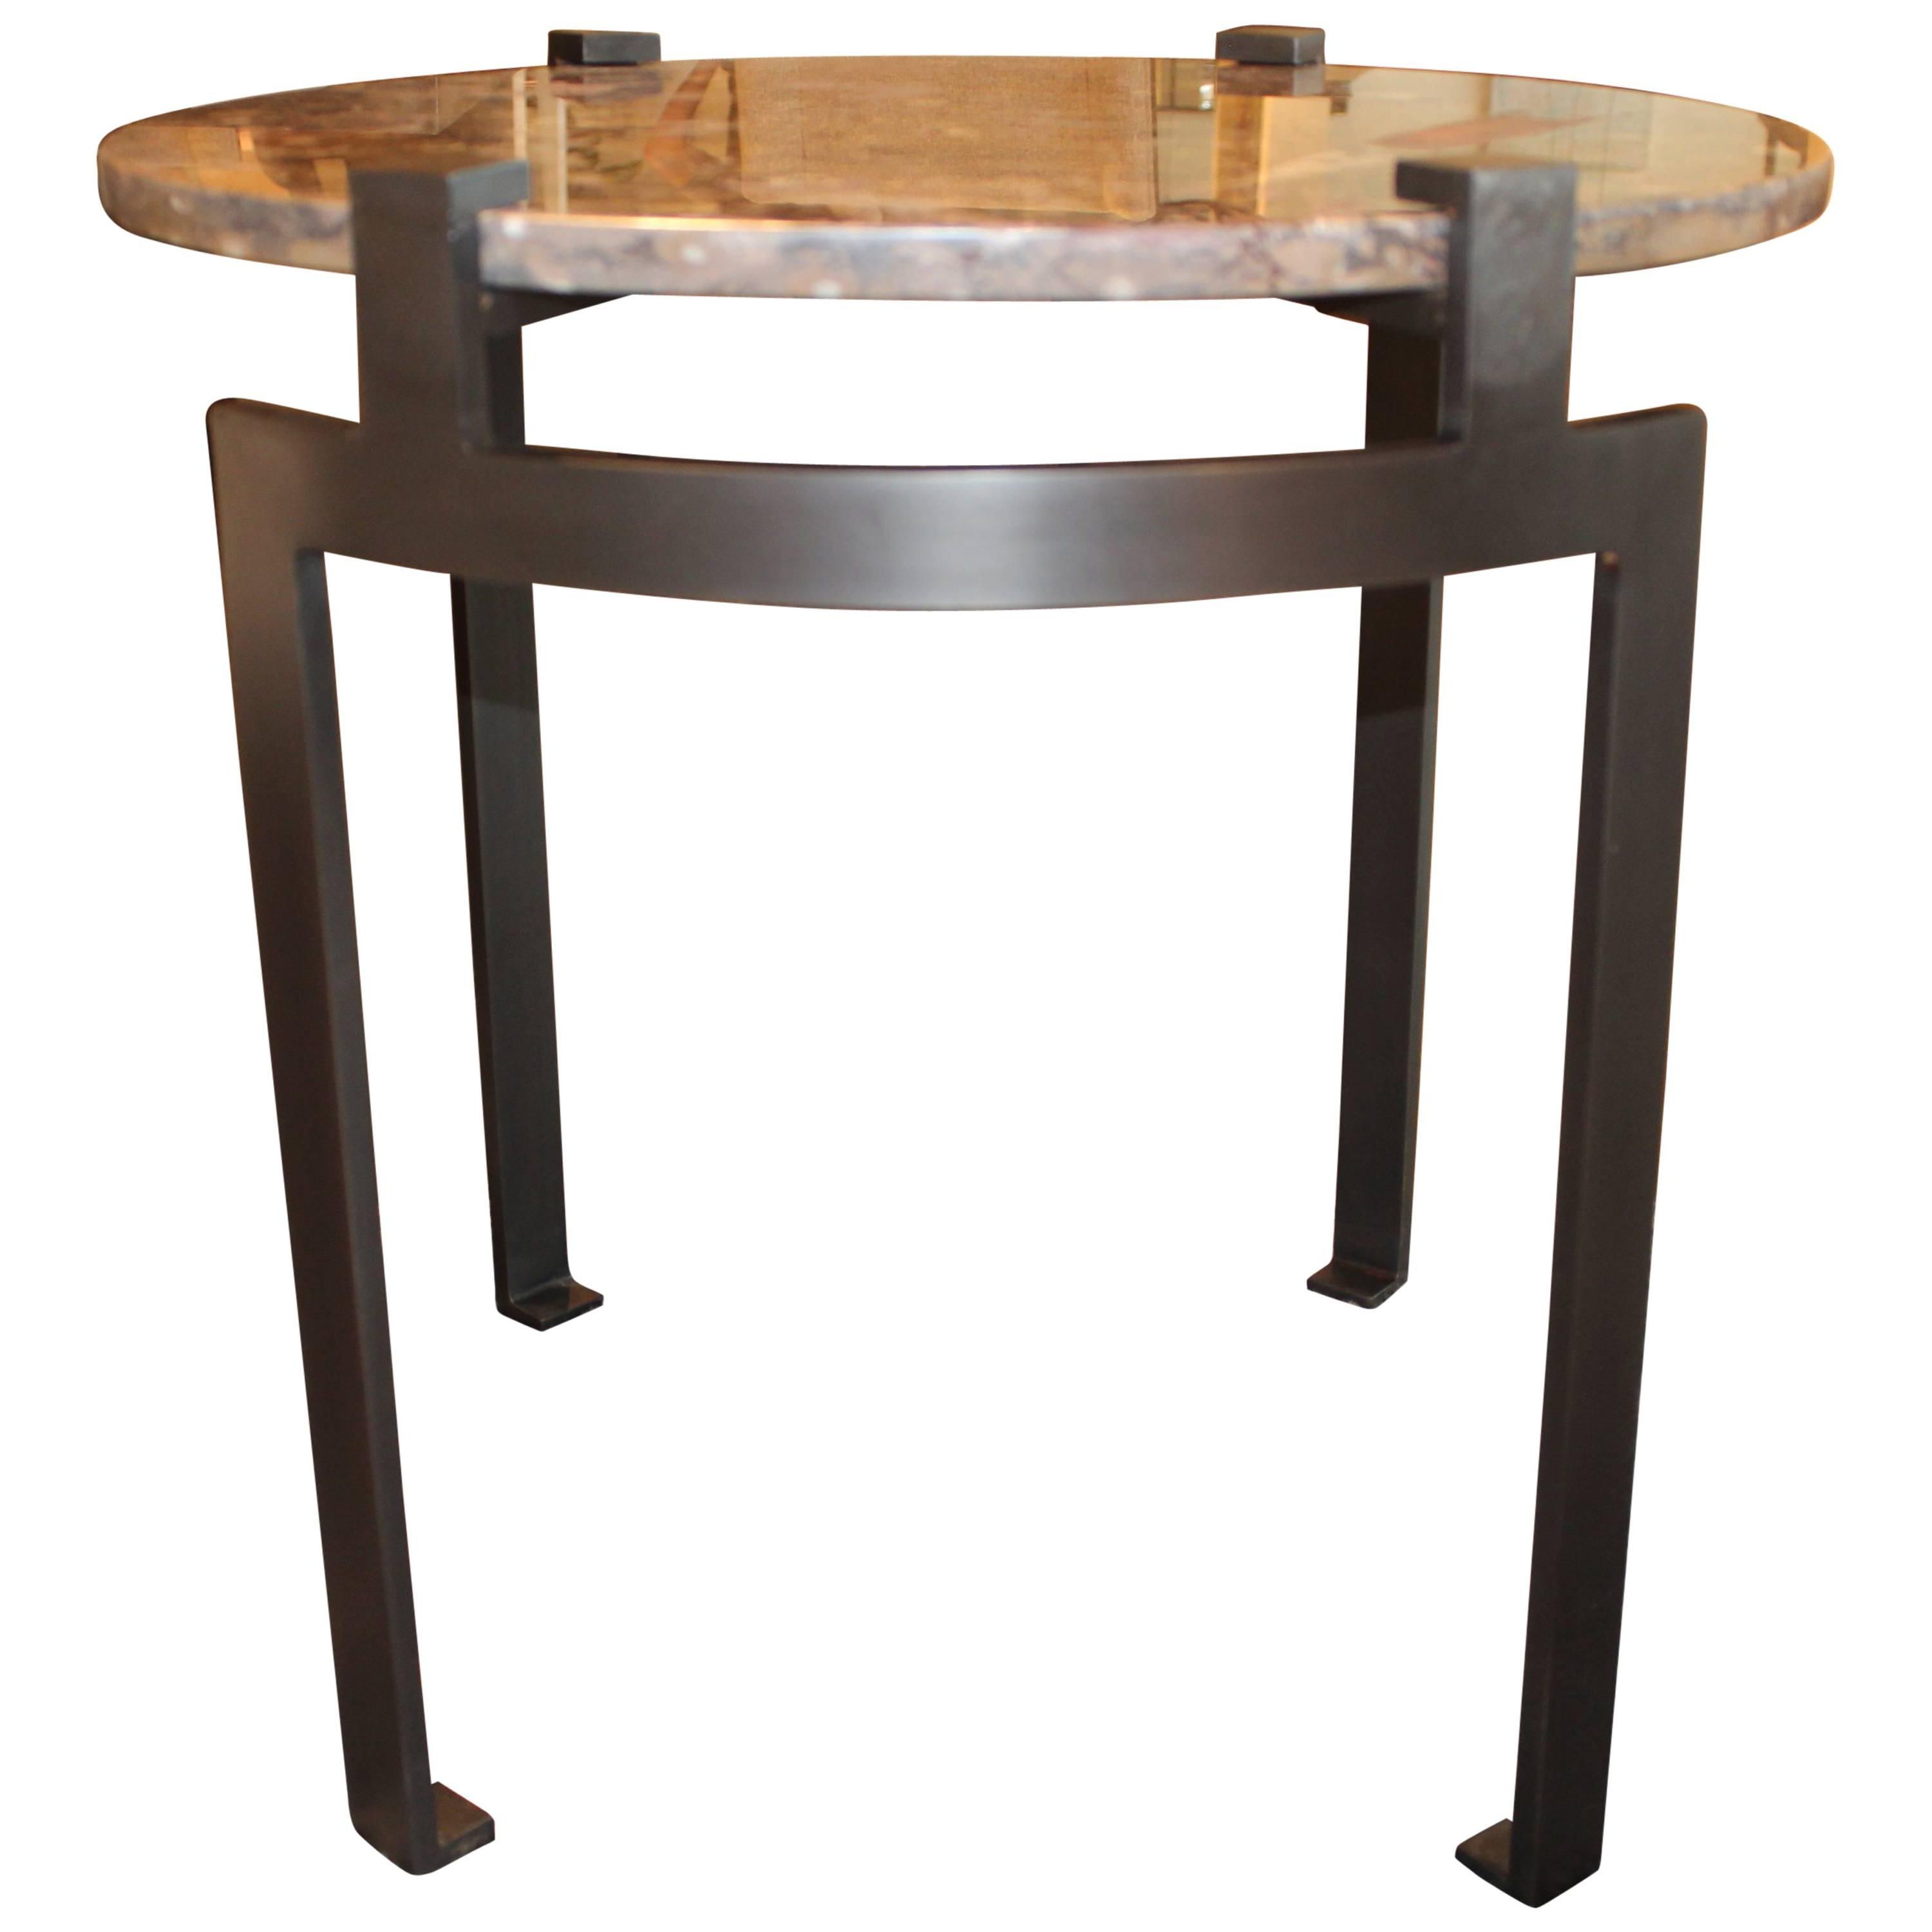 Era Limestone Console Tables Regarding Widely Used Bar Table On Polished Steel With Ebonized Limestone Top For Sale At (View 18 of 20)